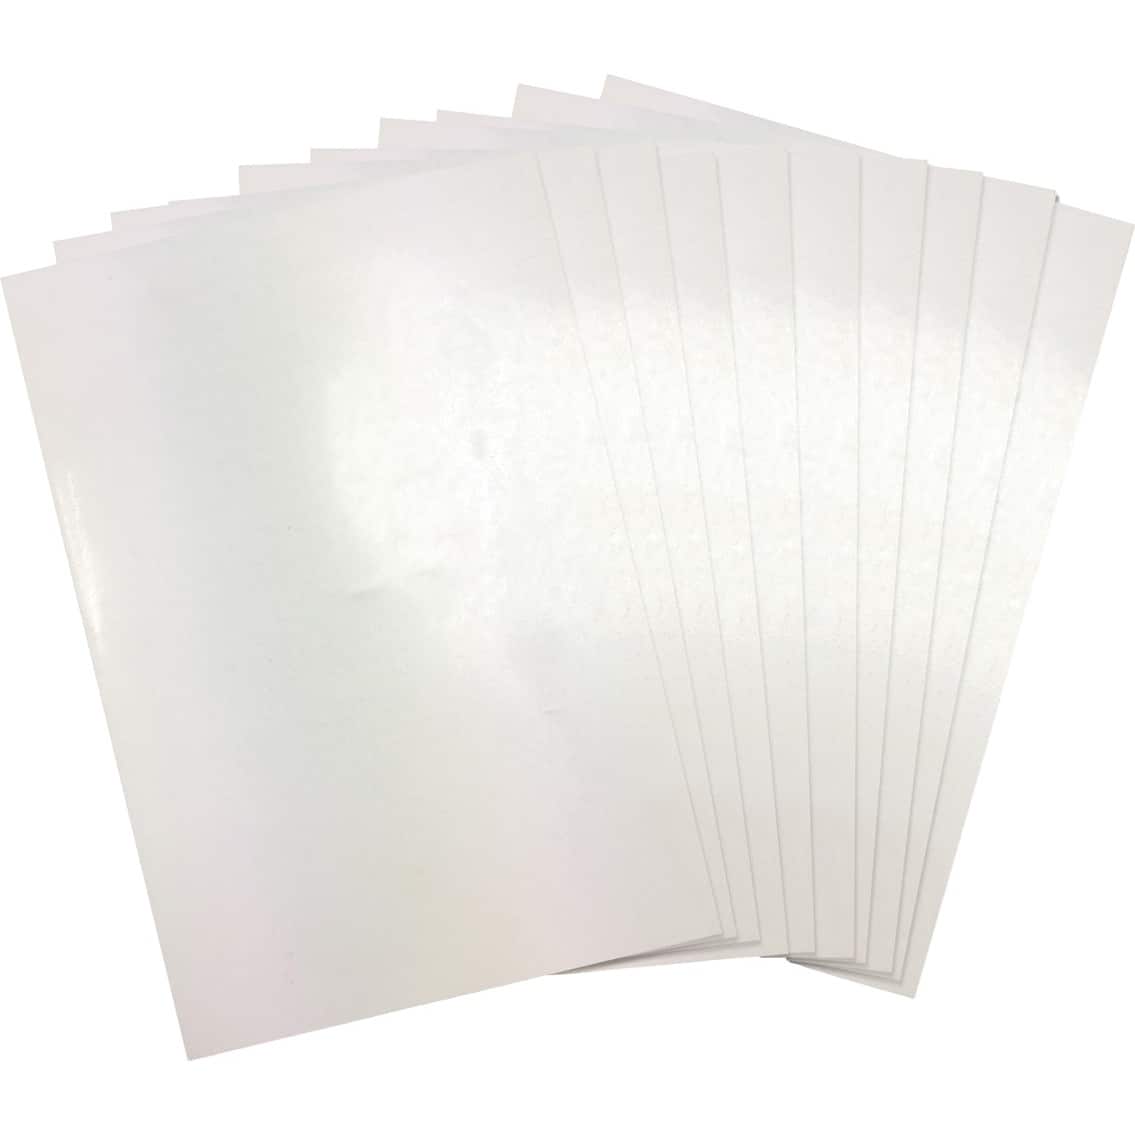 sizzix-shrink-plastic-sheets-10ct-specialty-materials-michaels